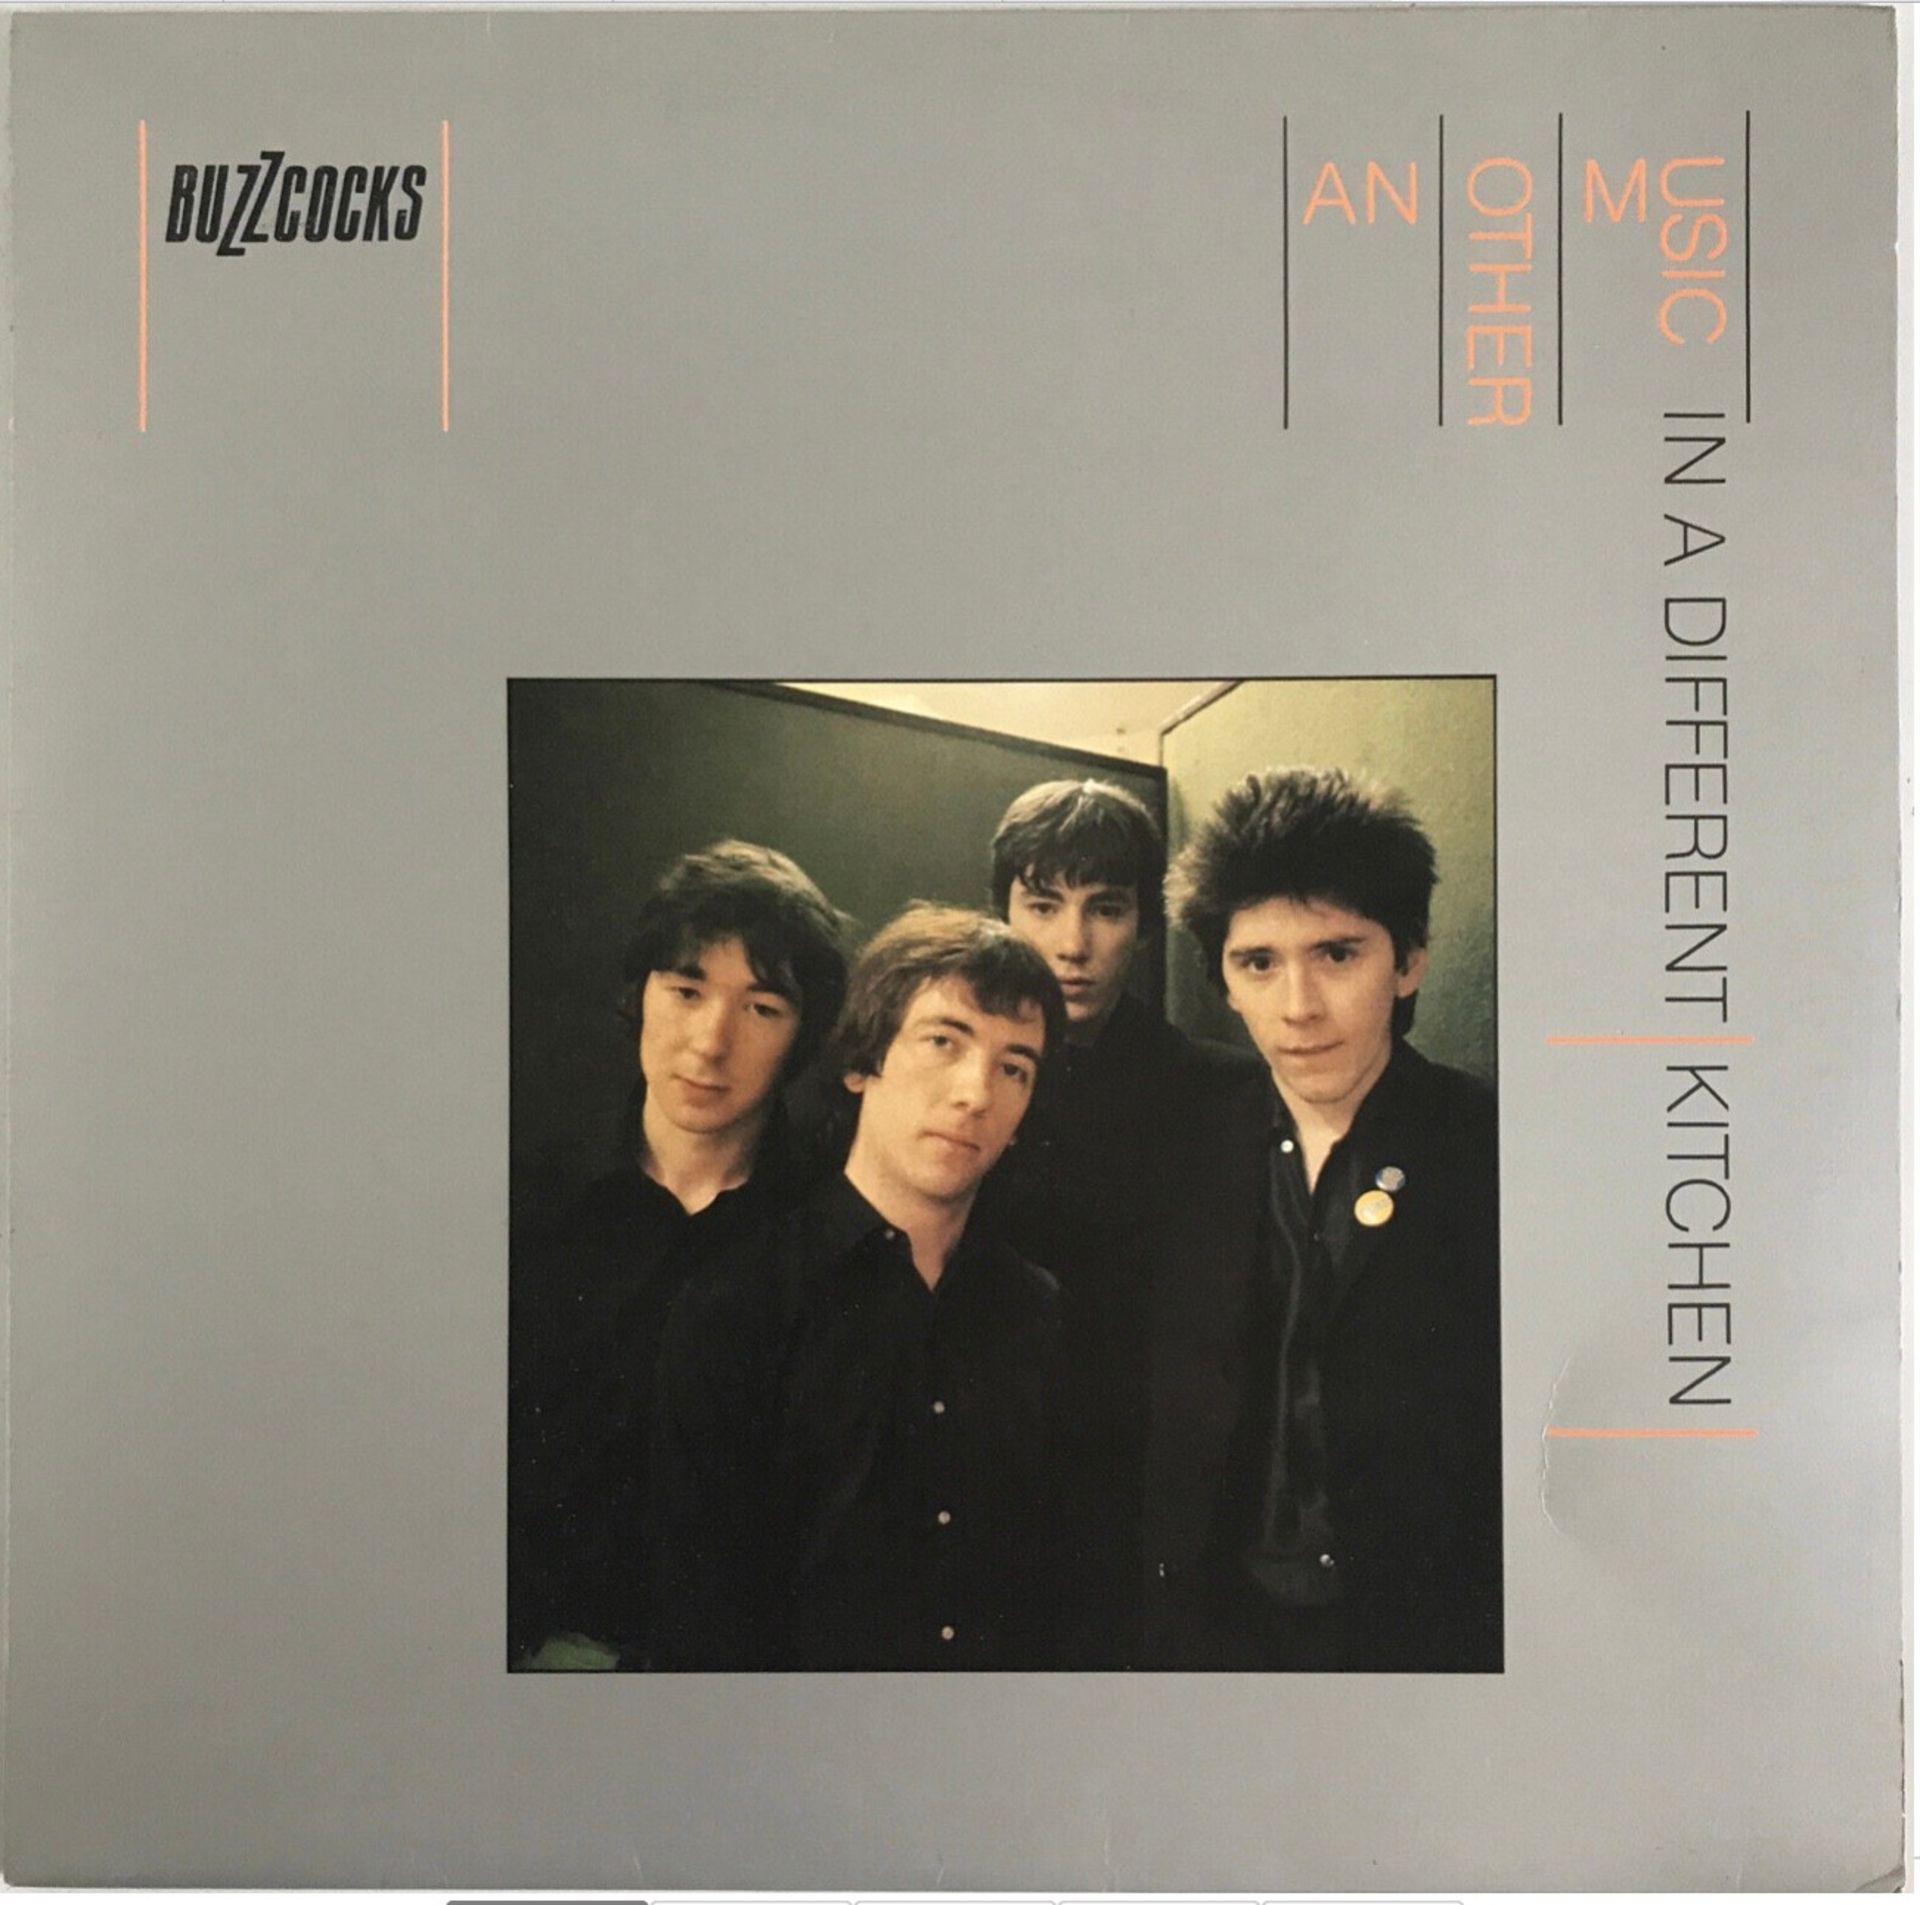 BUZZCOCKS LP ‘ANOTHER MUSIC IN A DIFFERENT KITCHEN’. UK United Artists First pressing from 1978